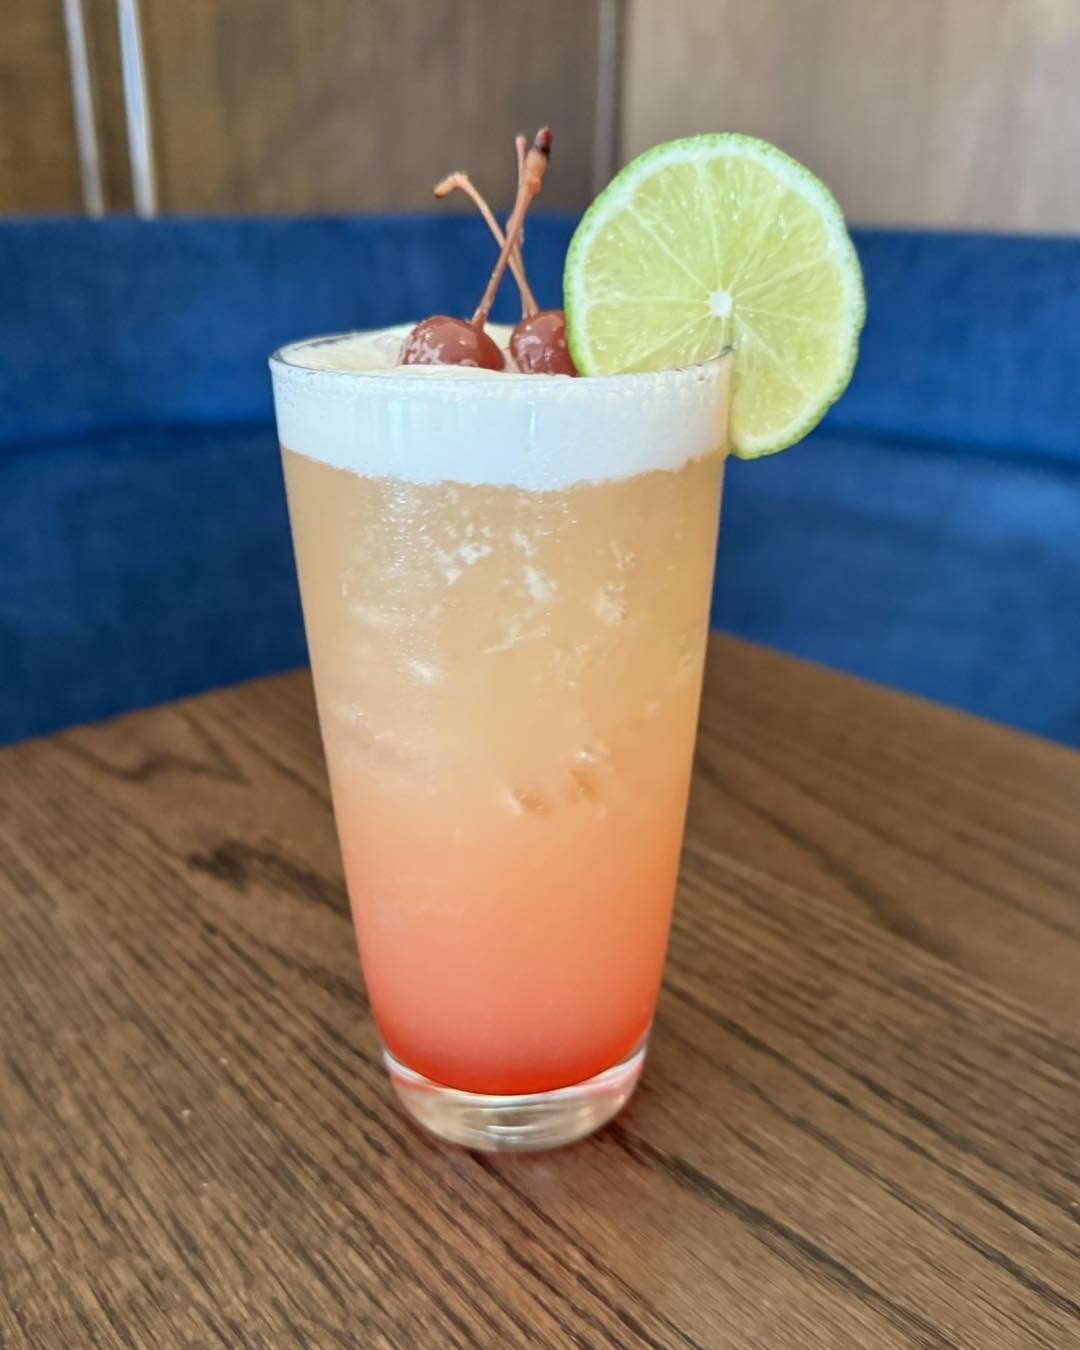 🌸 Celebrate Mother's Day in style at Powerhouse! Start the day with our exclusive Mother's Day Sunrise cocktail 🍹, followed by our scrumptious Chicken and Waffles 🍗🧇. Don't forget to explore our full brunch menu, packed with favorites that are su